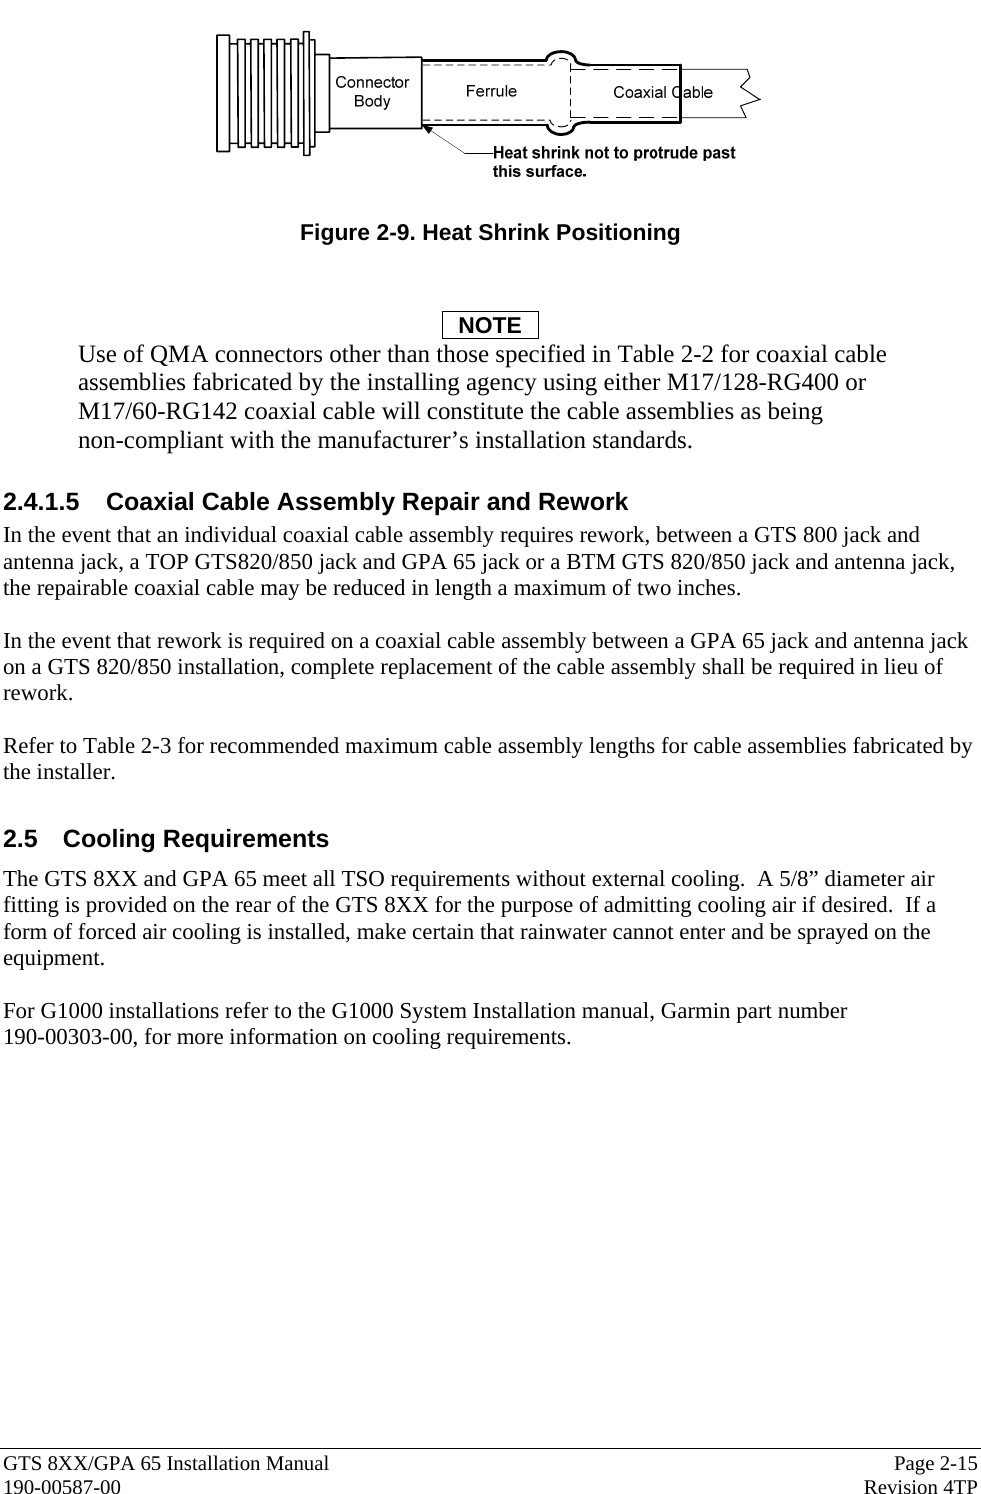  GTS 8XX/GPA 65 Installation Manual  Page 2-15 190-00587-00  Revision 4TP   Figure 2-9. Heat Shrink Positioning   NOTE Use of QMA connectors other than those specified in Table 2-2 for coaxial cable assemblies fabricated by the installing agency using either M17/128-RG400 or  M17/60-RG142 coaxial cable will constitute the cable assemblies as being  non-compliant with the manufacturer’s installation standards.  2.4.1.5  Coaxial Cable Assembly Repair and Rework In the event that an individual coaxial cable assembly requires rework, between a GTS 800 jack and antenna jack, a TOP GTS820/850 jack and GPA 65 jack or a BTM GTS 820/850 jack and antenna jack, the repairable coaxial cable may be reduced in length a maximum of two inches.    In the event that rework is required on a coaxial cable assembly between a GPA 65 jack and antenna jack on a GTS 820/850 installation, complete replacement of the cable assembly shall be required in lieu of rework.    Refer to Table 2-3 for recommended maximum cable assembly lengths for cable assemblies fabricated by the installer.  2.5 Cooling Requirements The GTS 8XX and GPA 65 meet all TSO requirements without external cooling.  A 5/8” diameter air fitting is provided on the rear of the GTS 8XX for the purpose of admitting cooling air if desired.  If a form of forced air cooling is installed, make certain that rainwater cannot enter and be sprayed on the equipment.  For G1000 installations refer to the G1000 System Installation manual, Garmin part number  190-00303-00, for more information on cooling requirements. 